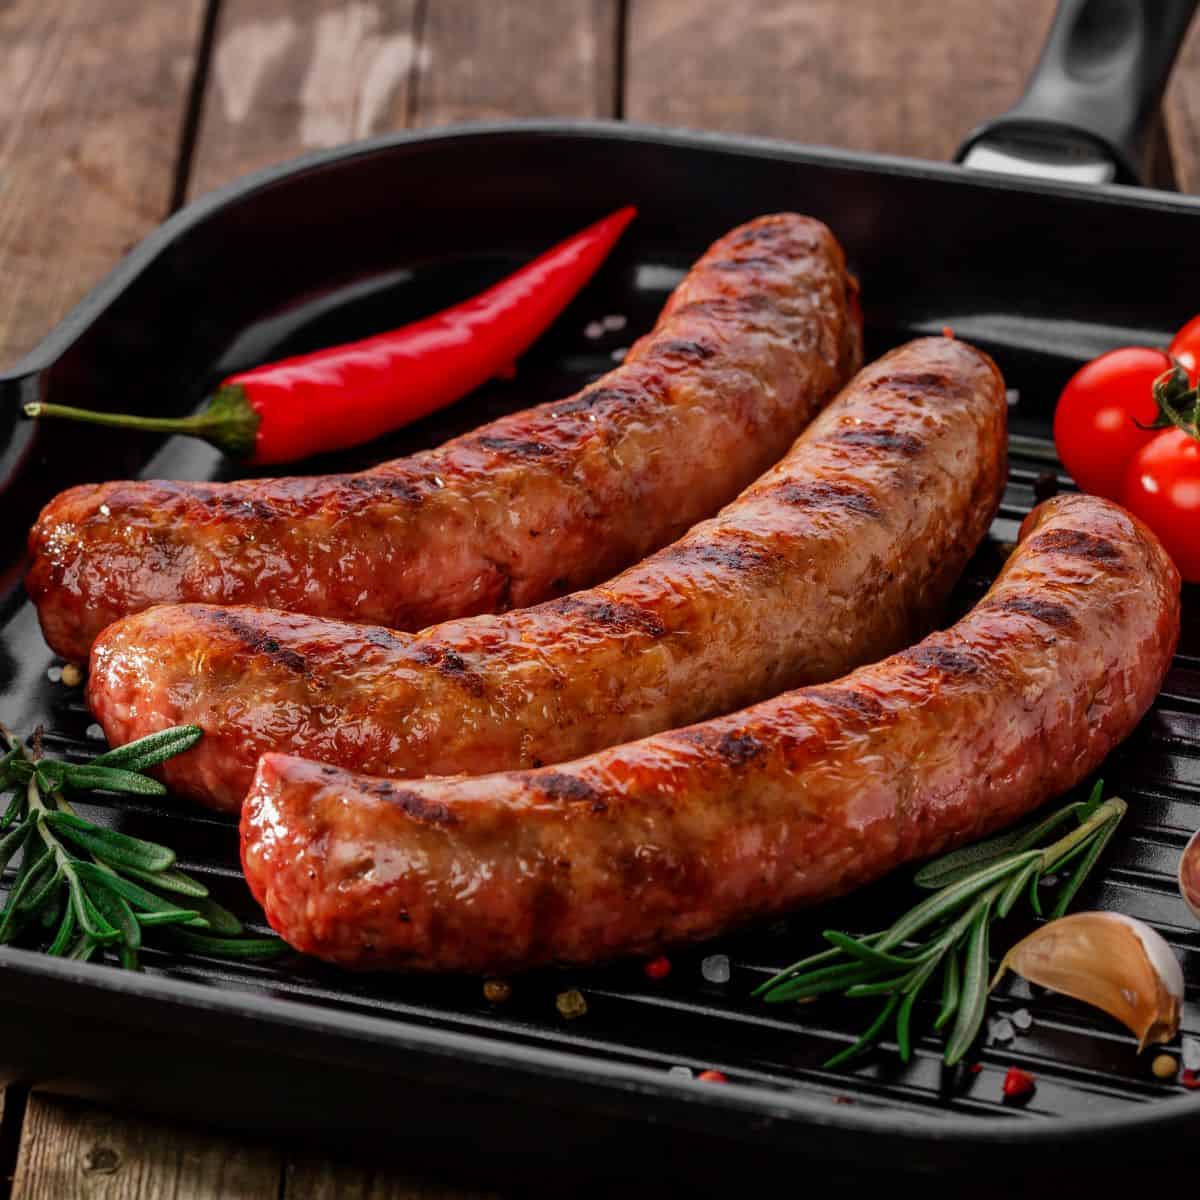 How to reheat sausages